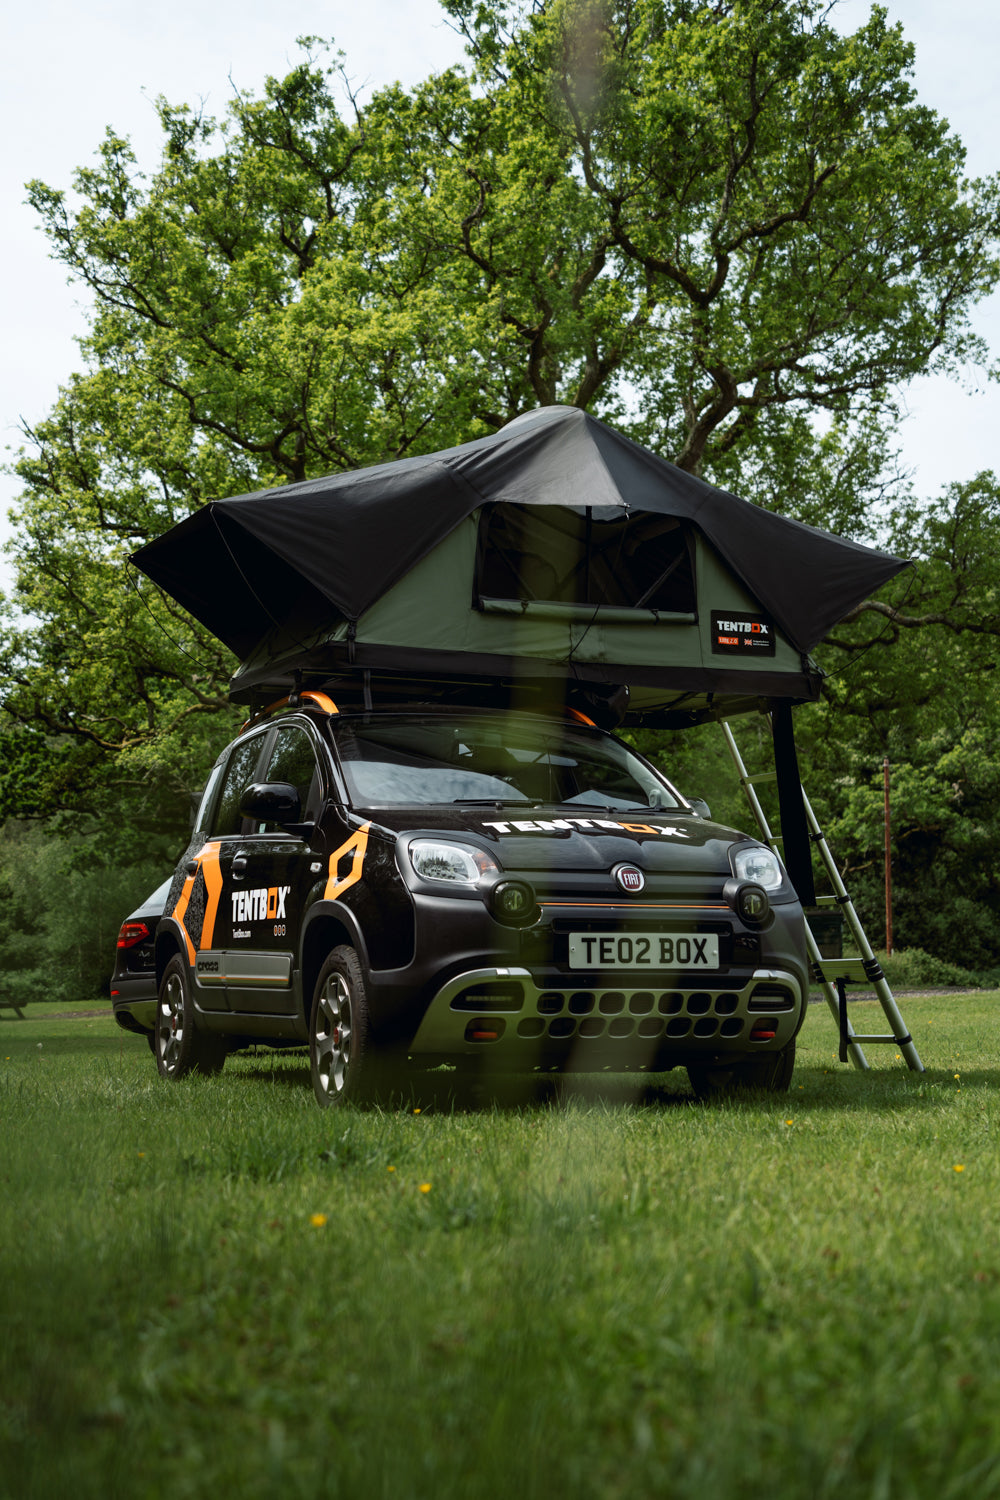 TentBox Lite 2.0 Rooftop Tent - 2 Person